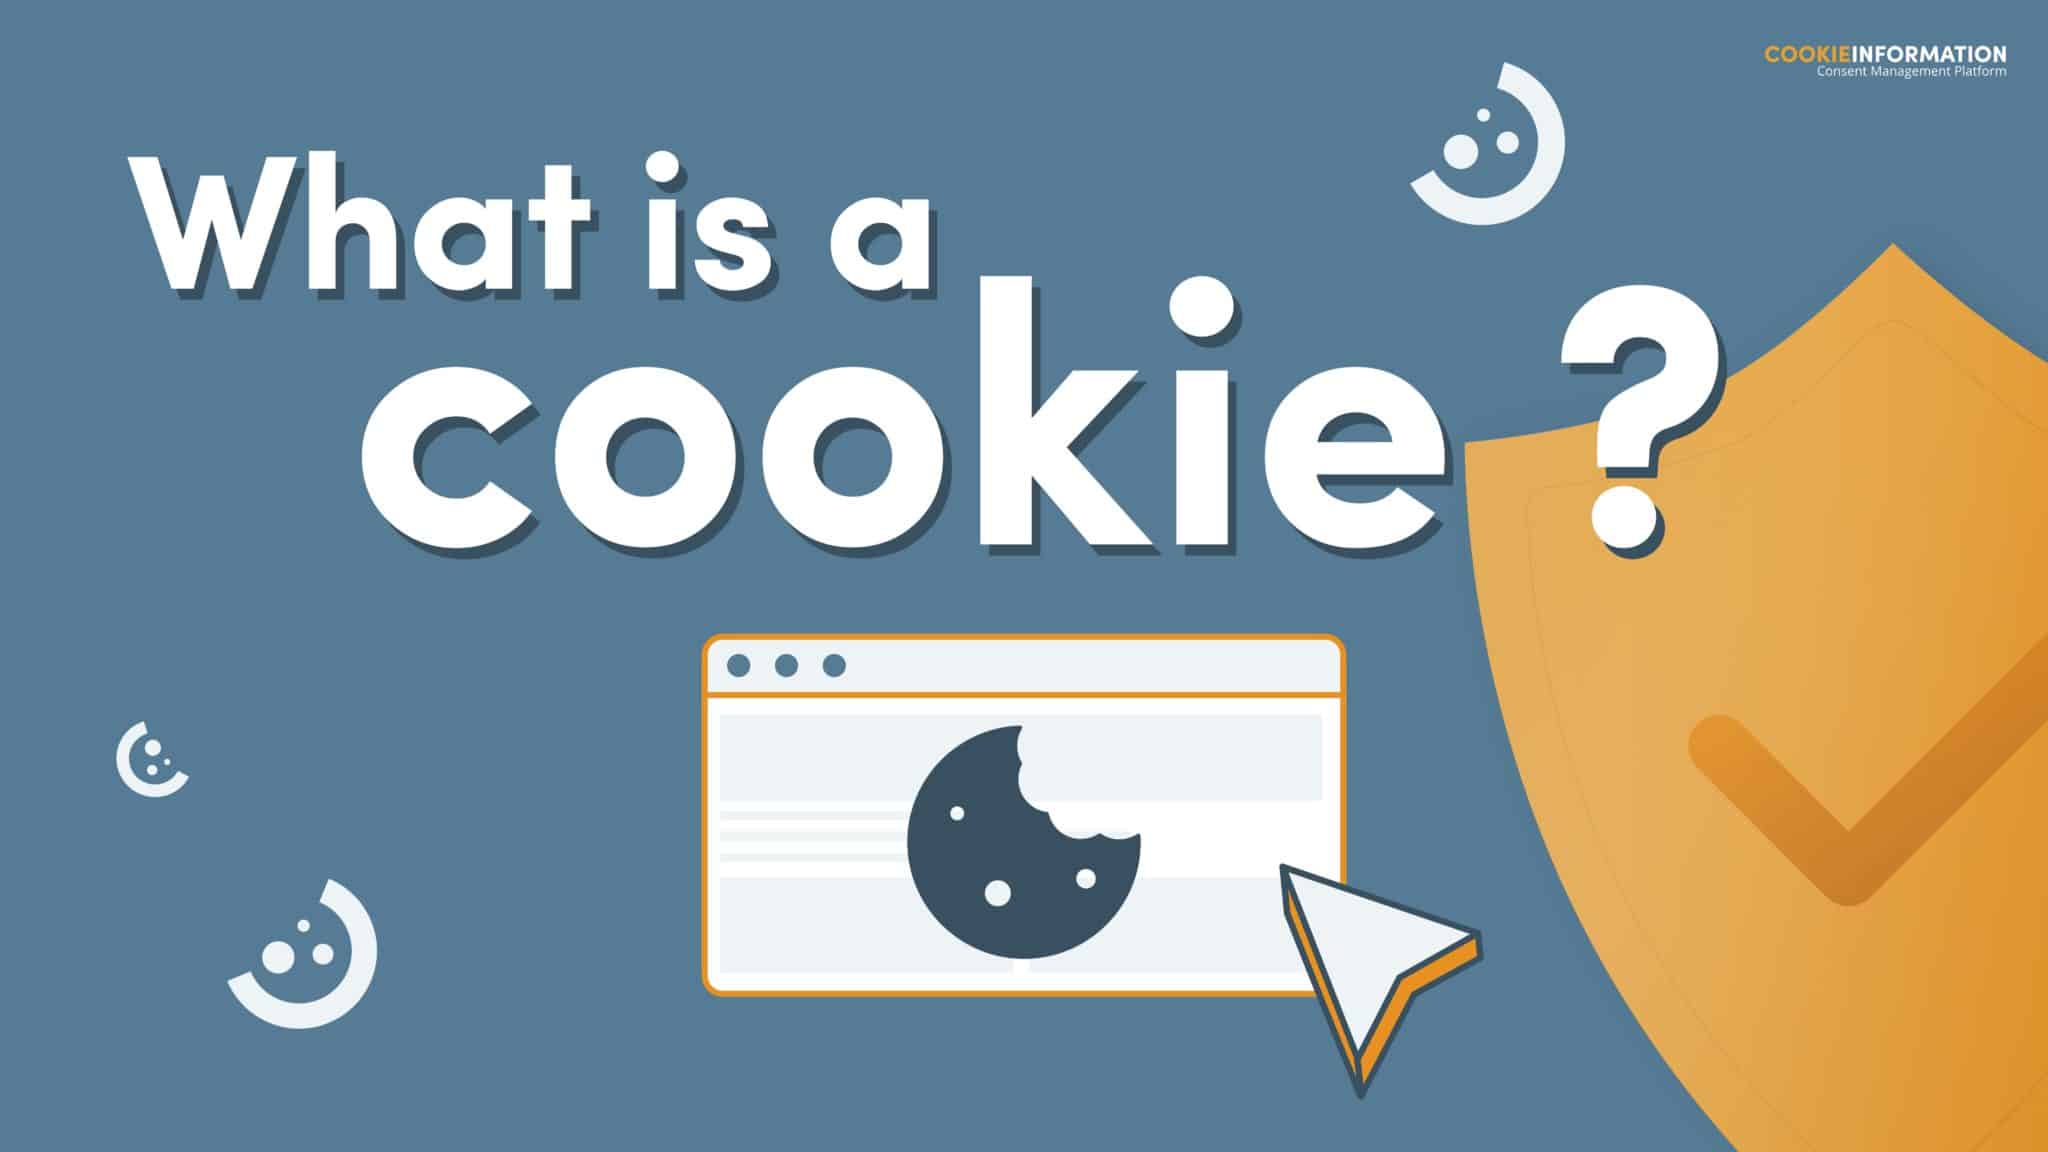 Archaeologist today Massage What is a cookie? - Become compliant with Cookie Information